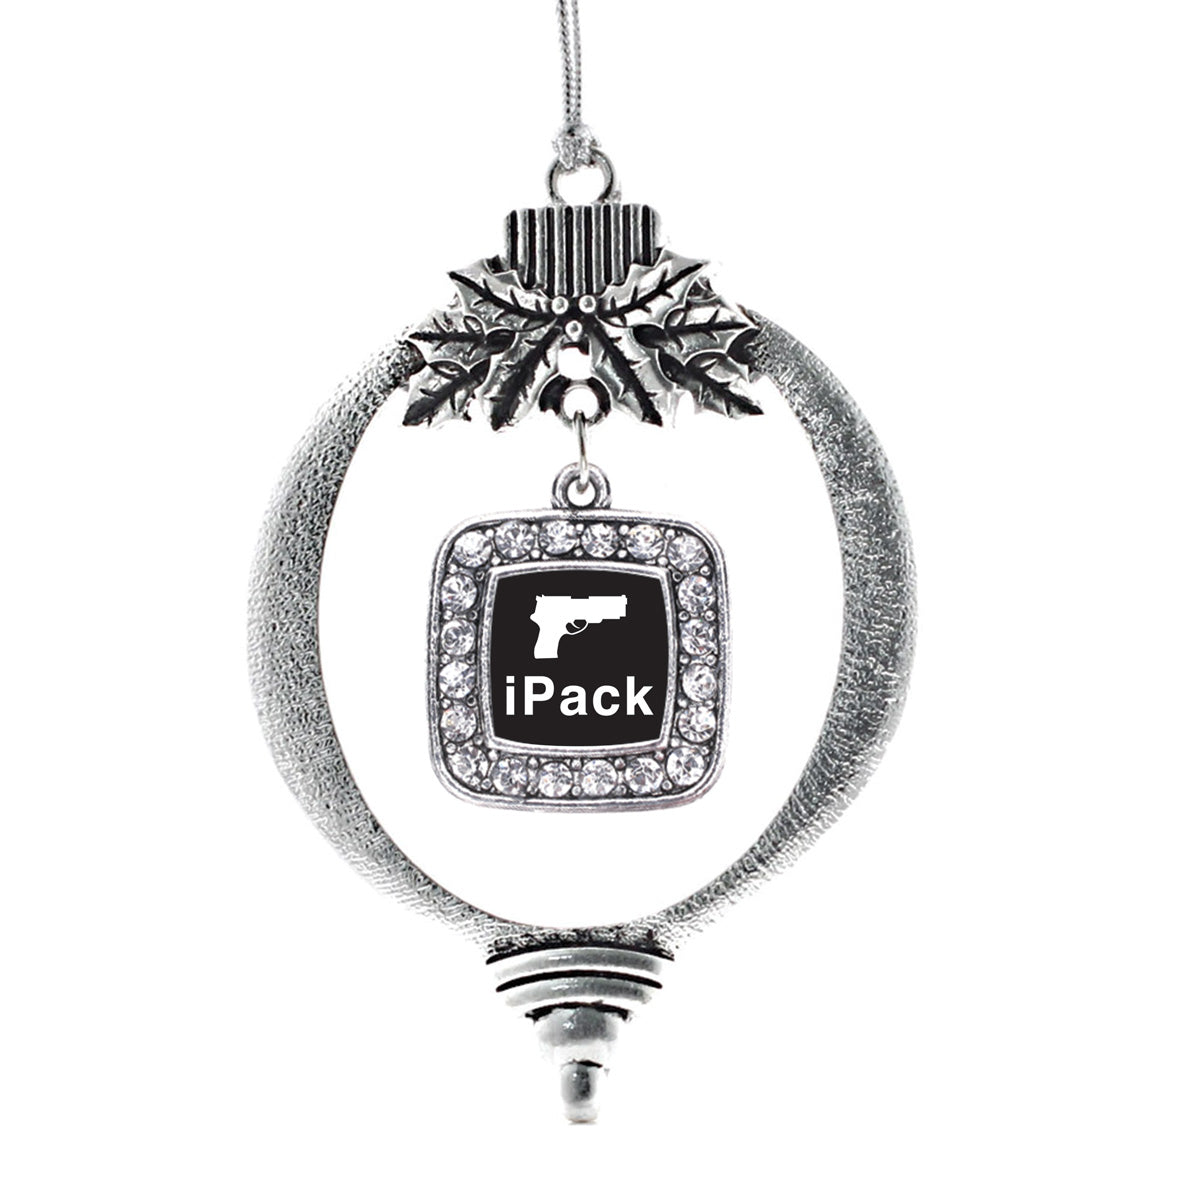 iPack Square Charm Christmas / Holiday Ornament